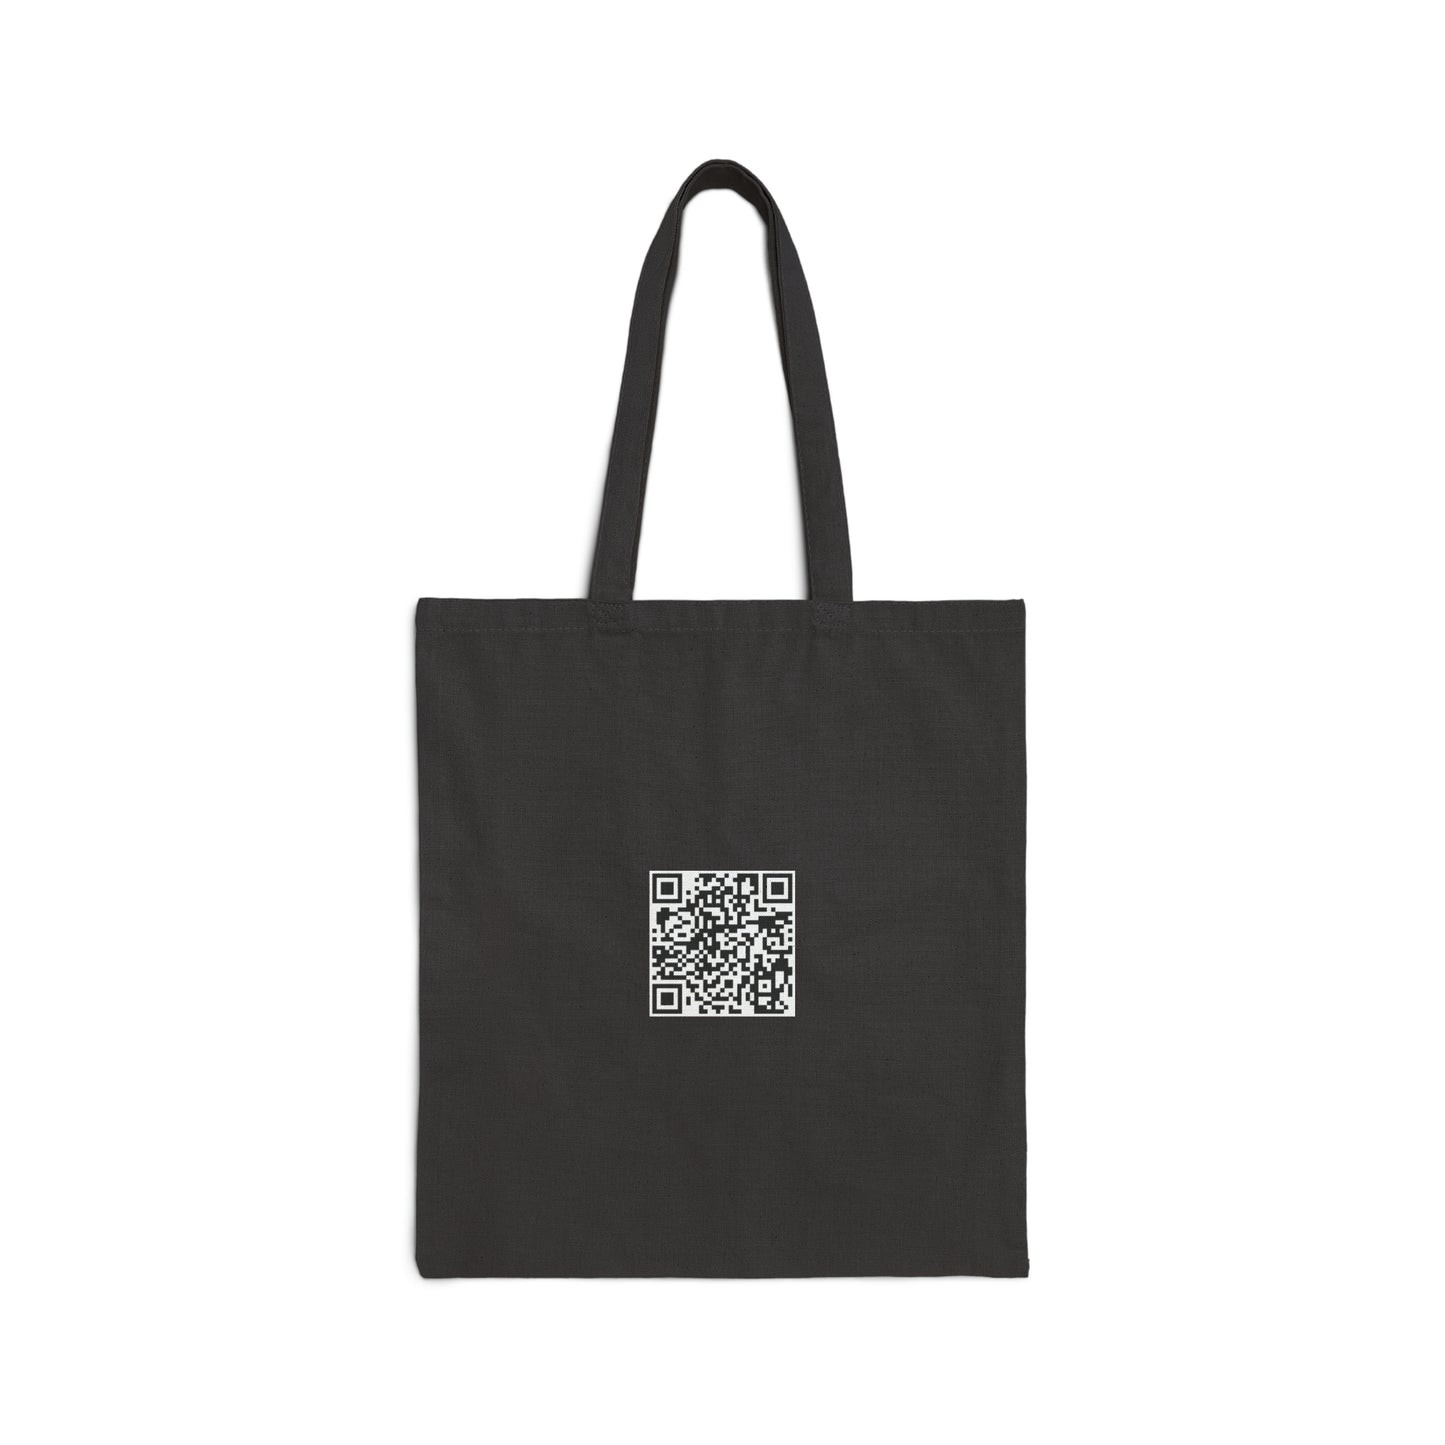 Bubbles Travels In Time - Cotton Canvas Tote Bag